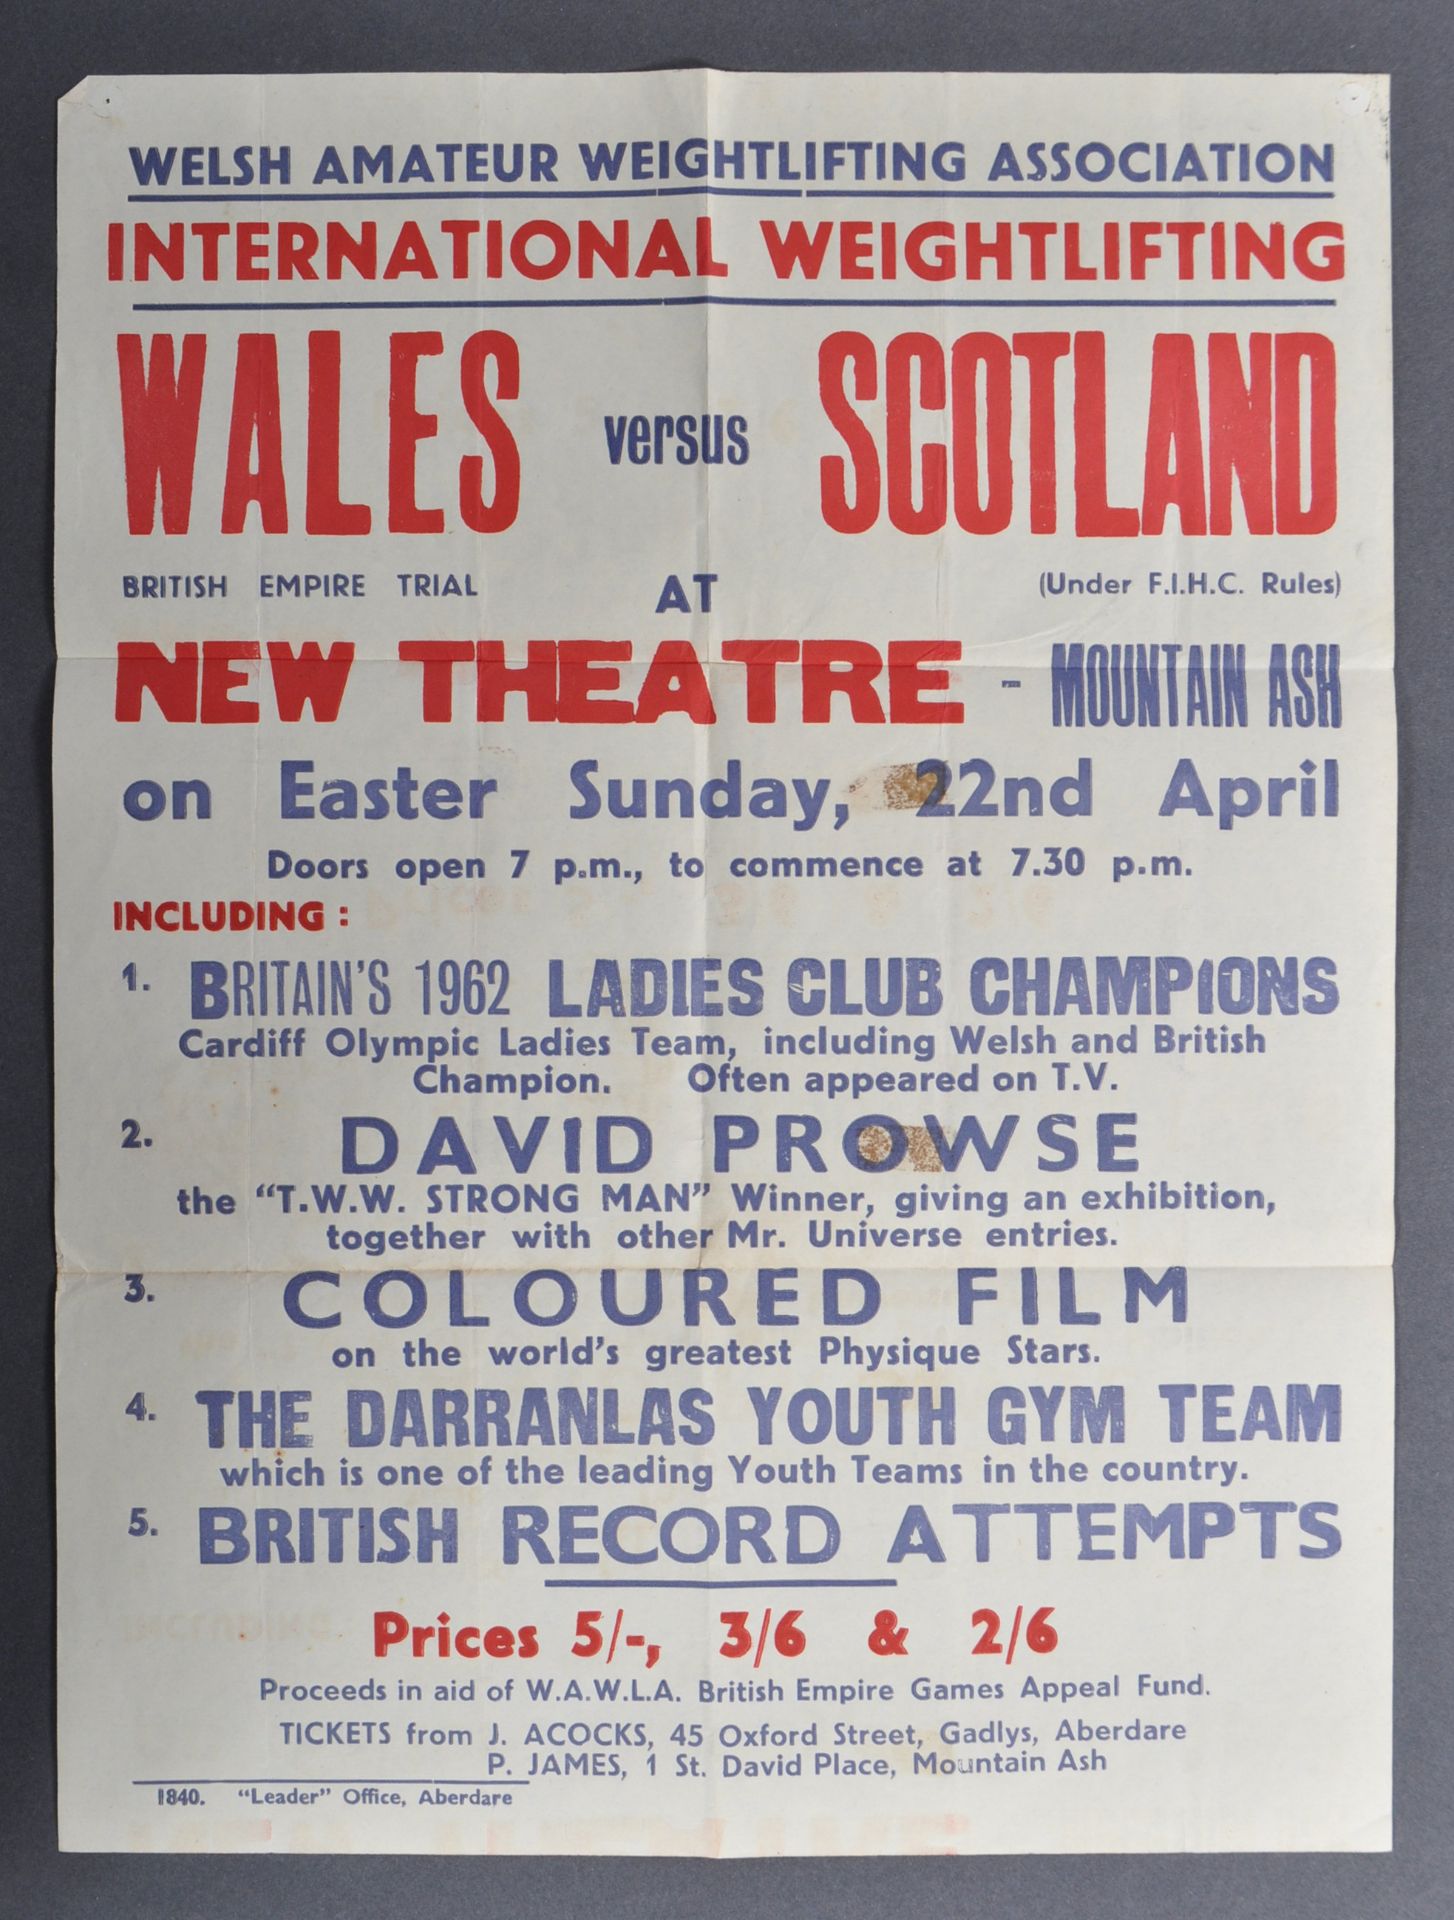 ESTATE OF DAVE PROWSE - 1962 WEIGHTLIFTING POSTER